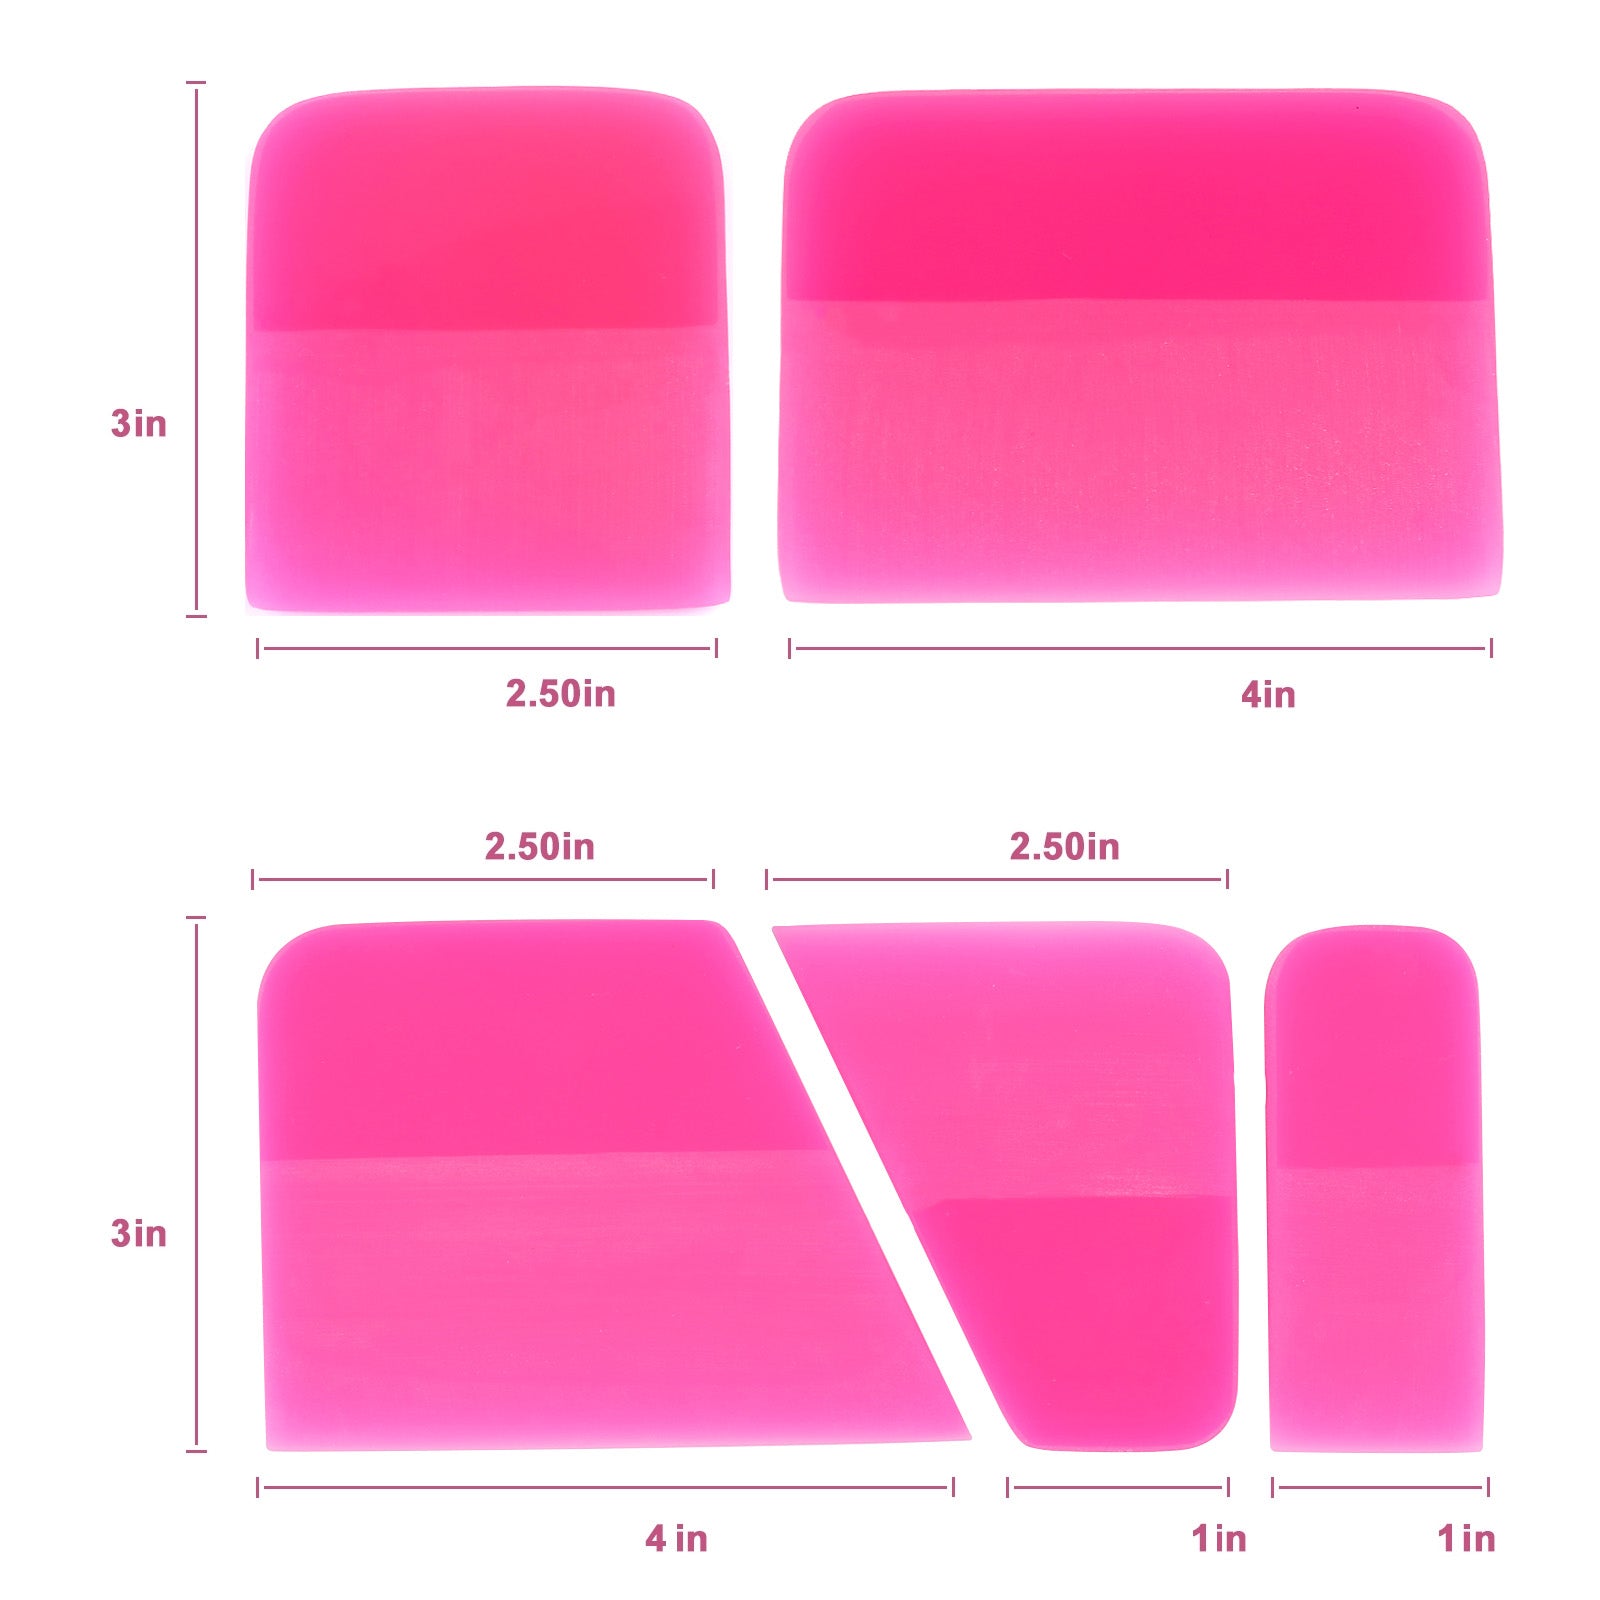 Pink PPF Squeegee,PPF Blackout Squeegee,Rubber Car Squeegee